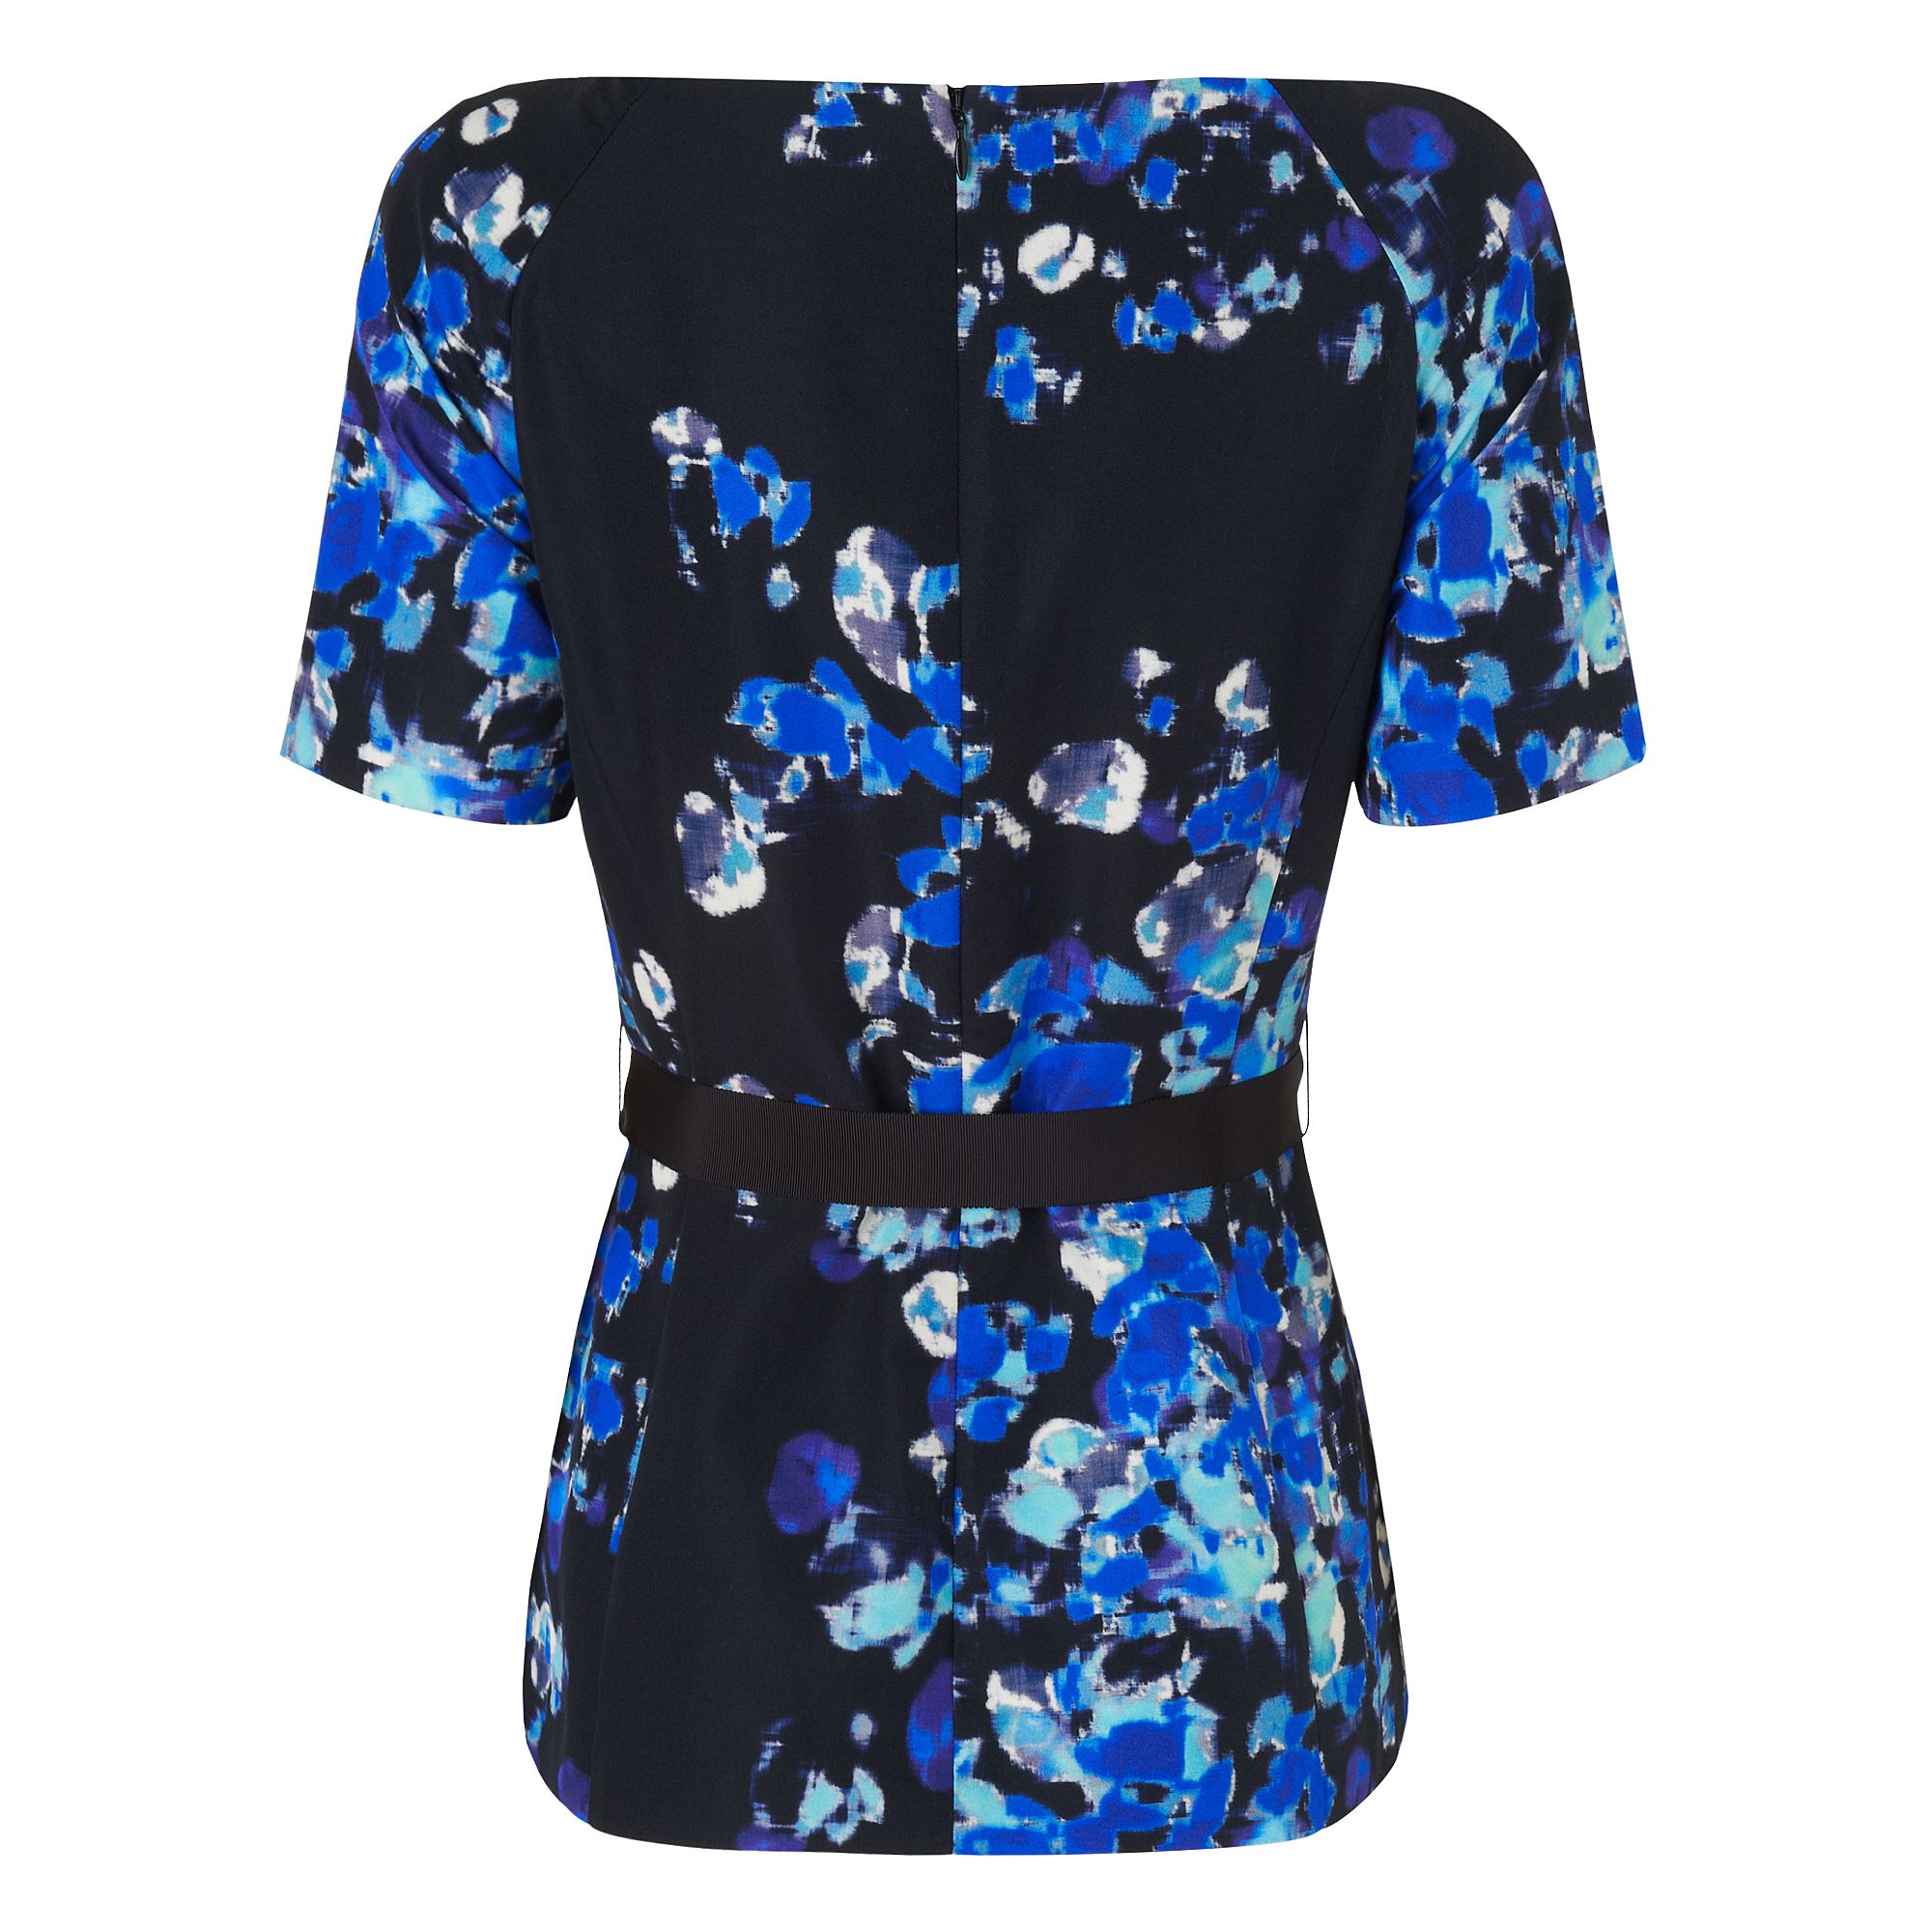 L.k.bennett Leticia Printed Top in Blue | Lyst